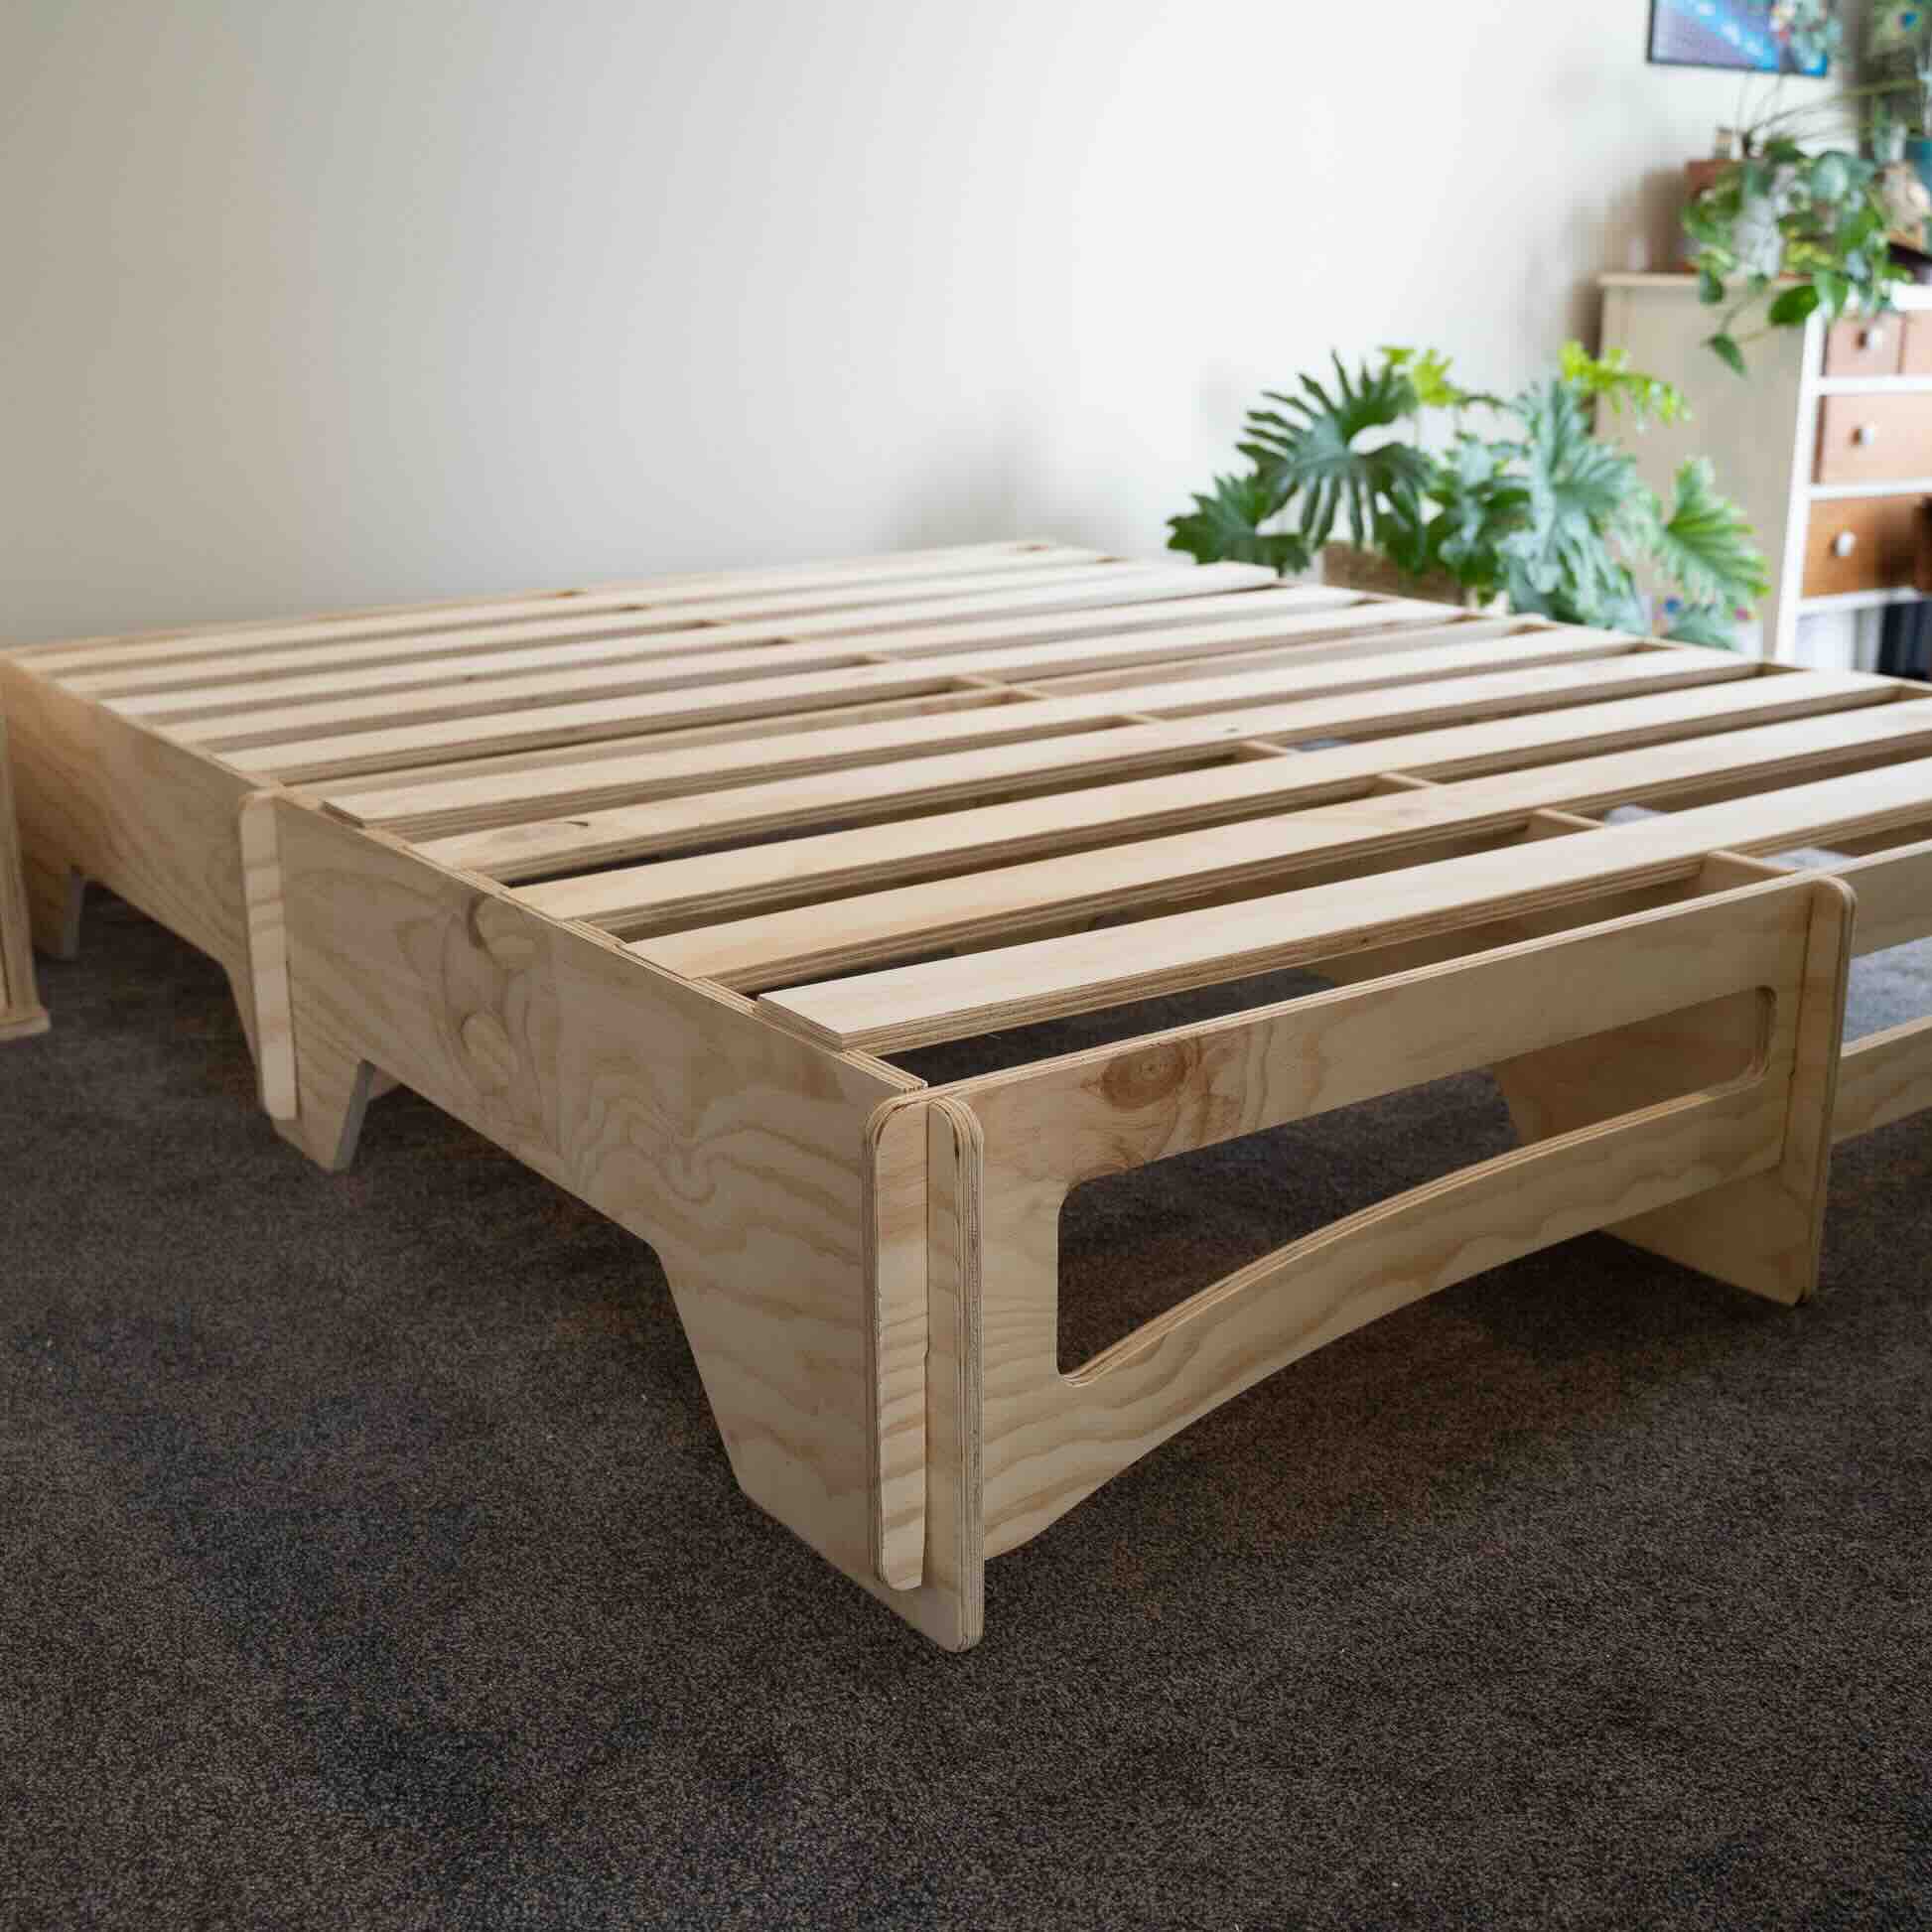 What Is The Best Wood To Use For A Bed Frame